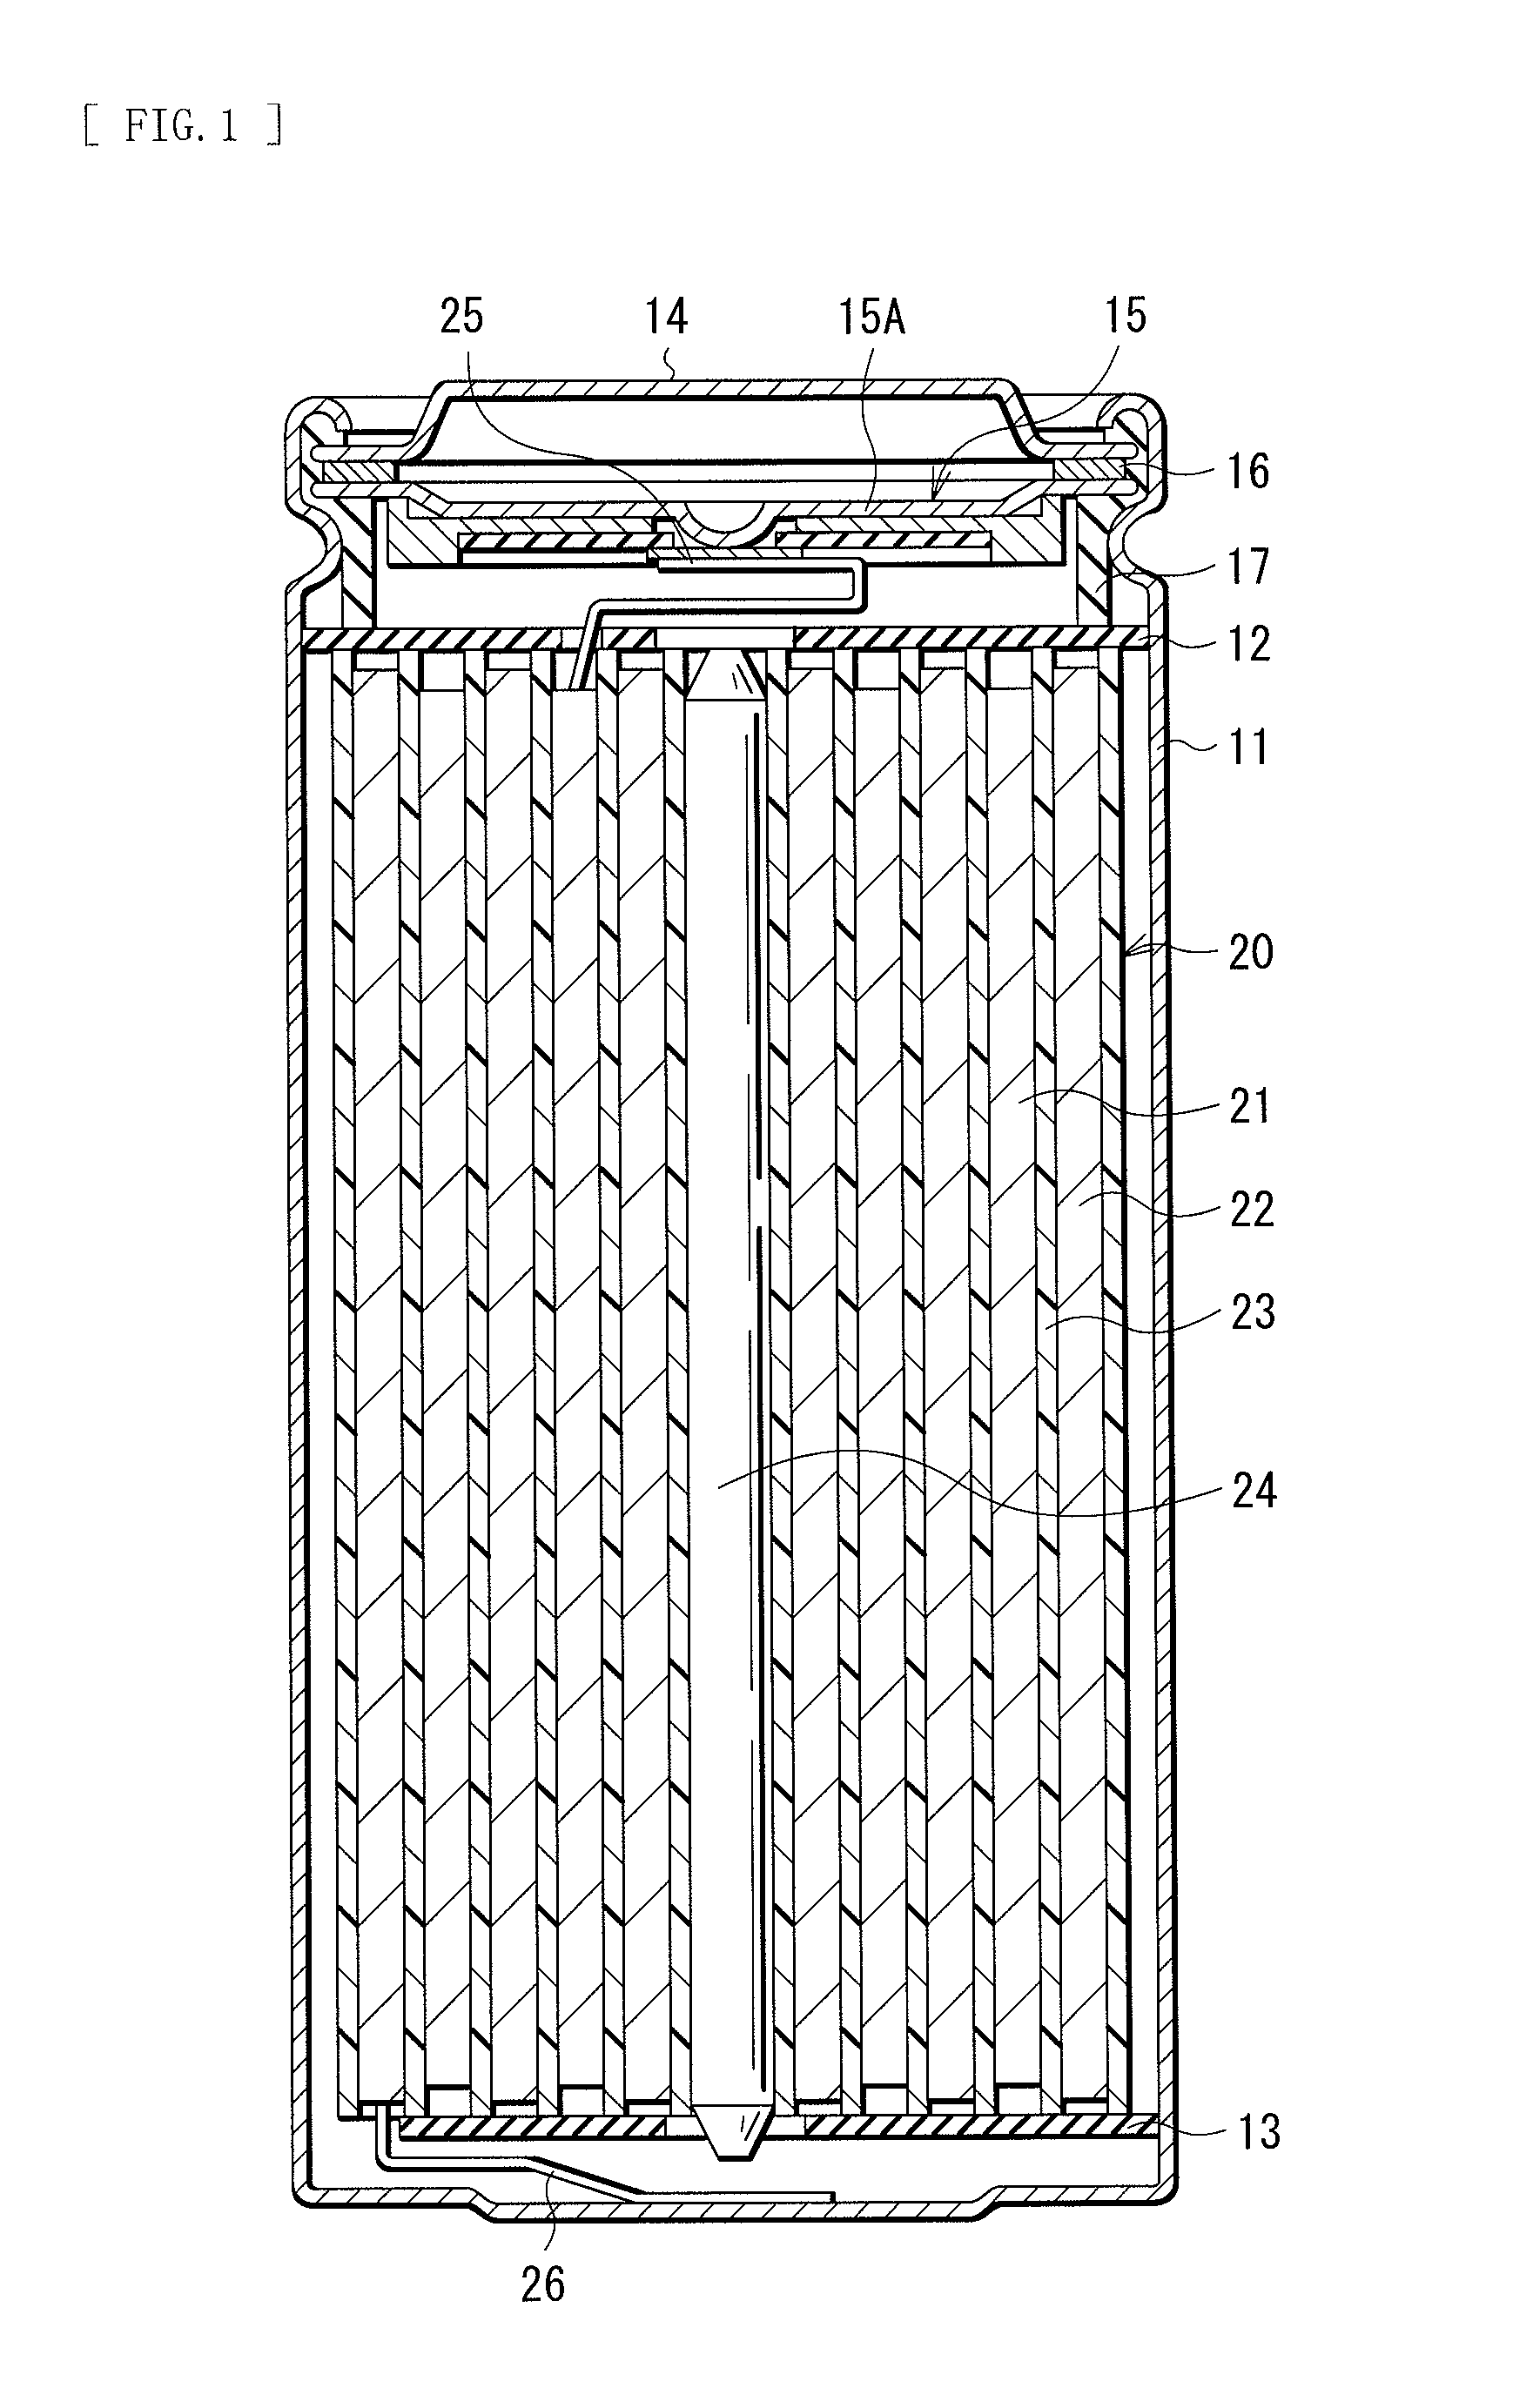 Secondary battery, electrolytic solution, battery pack, electronic device, and electrical vehicle